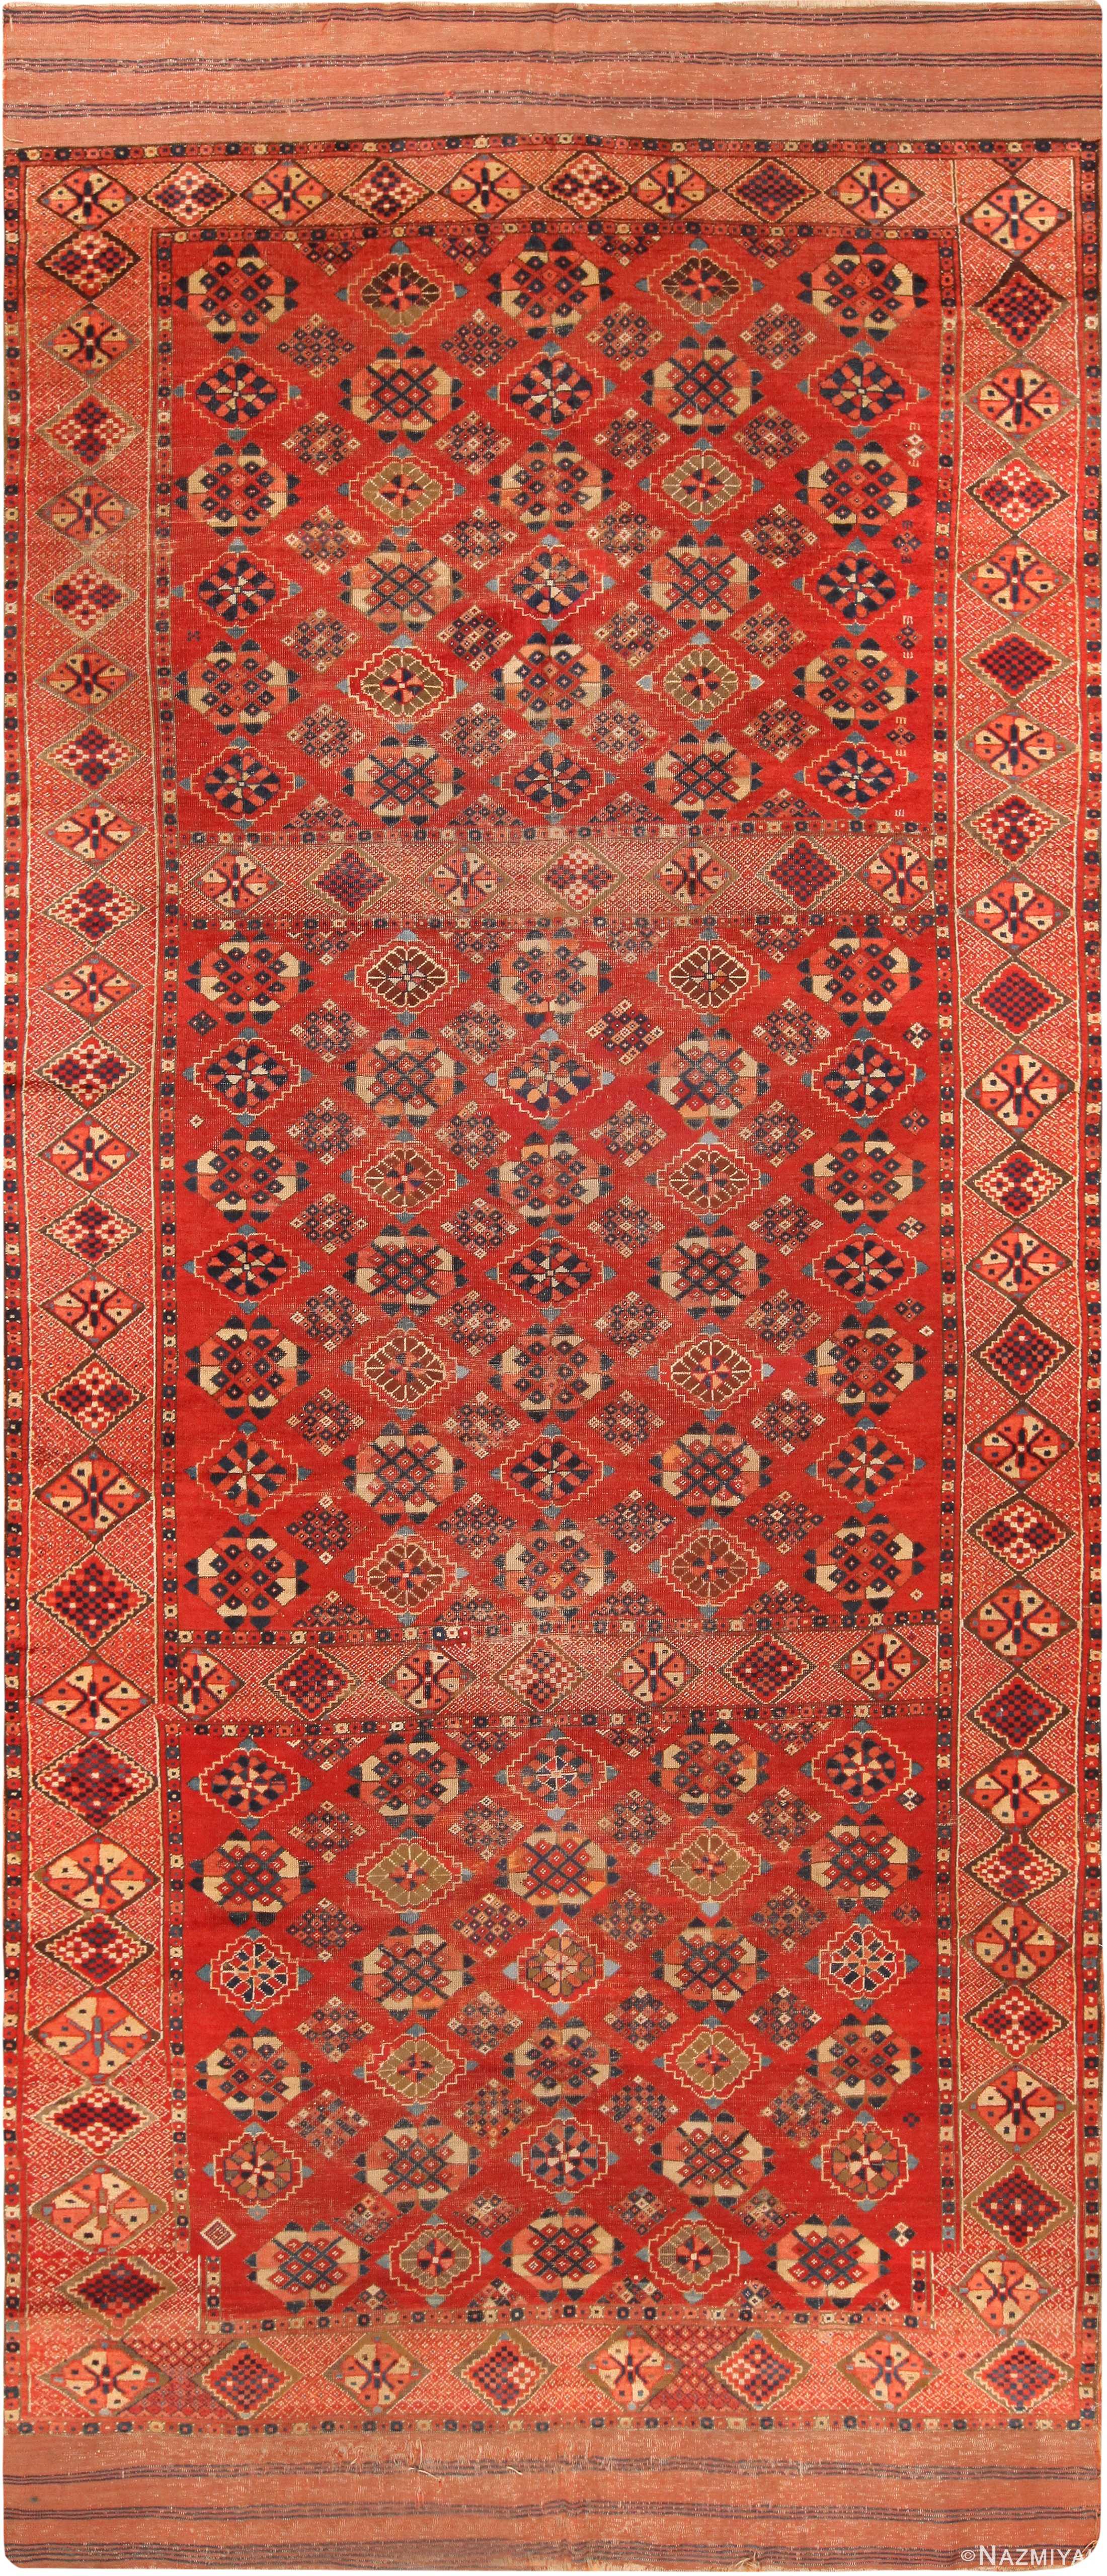 Gallery Size Antique Afghan Bashir Rug 71471 by Nazmiyal Antique Rugs